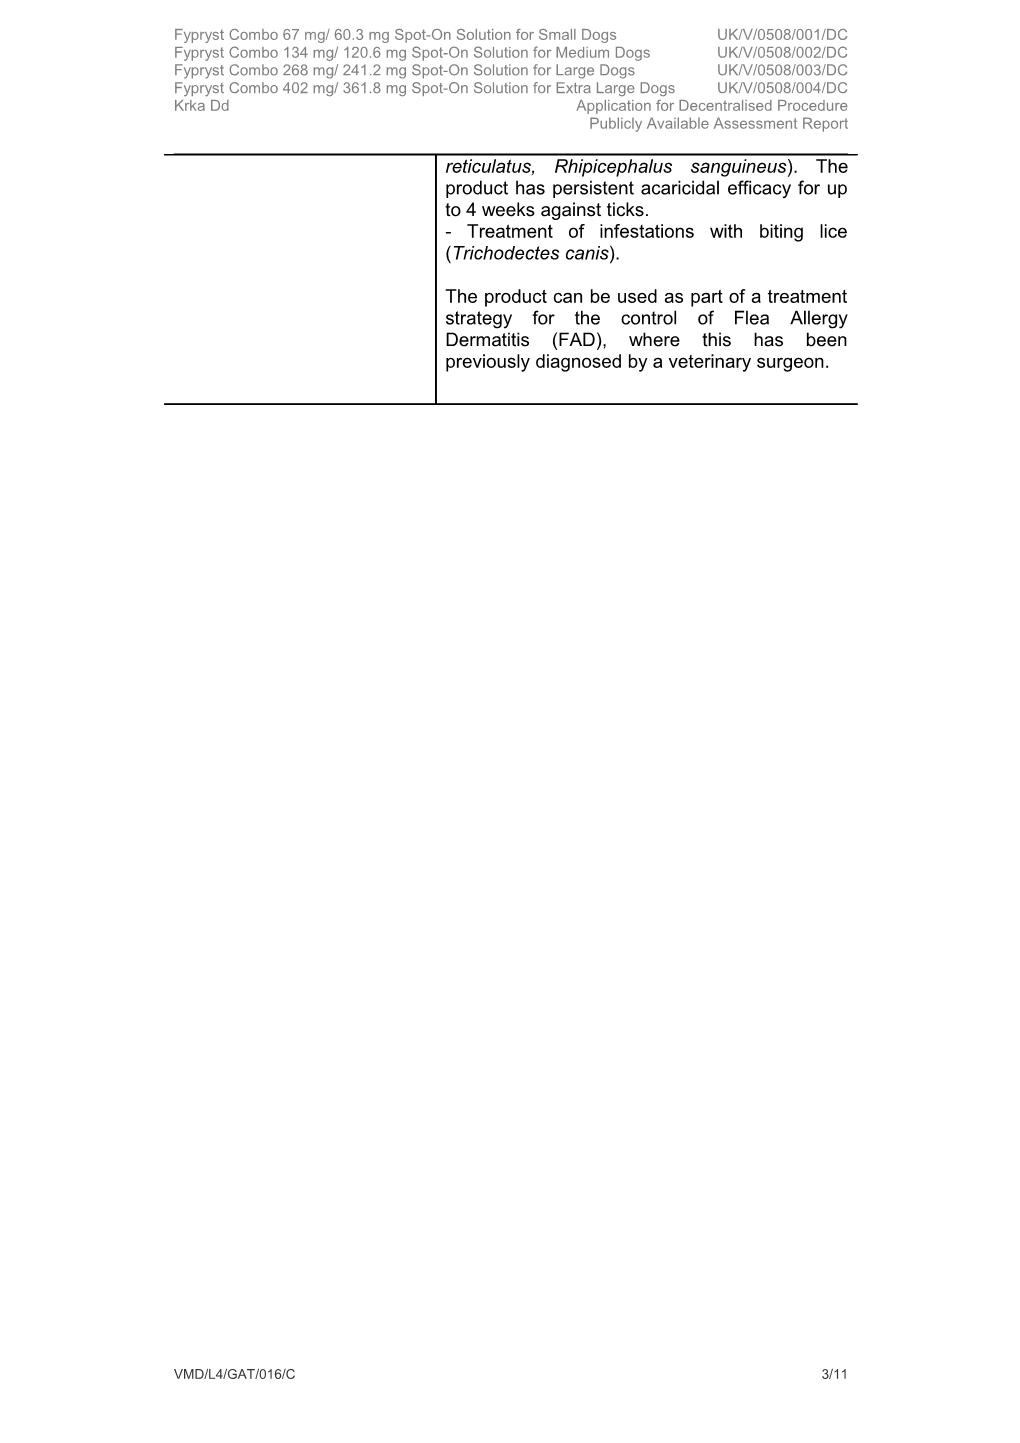 Publicly Available Assessment Report for a Veterinary Medicinal Product s3